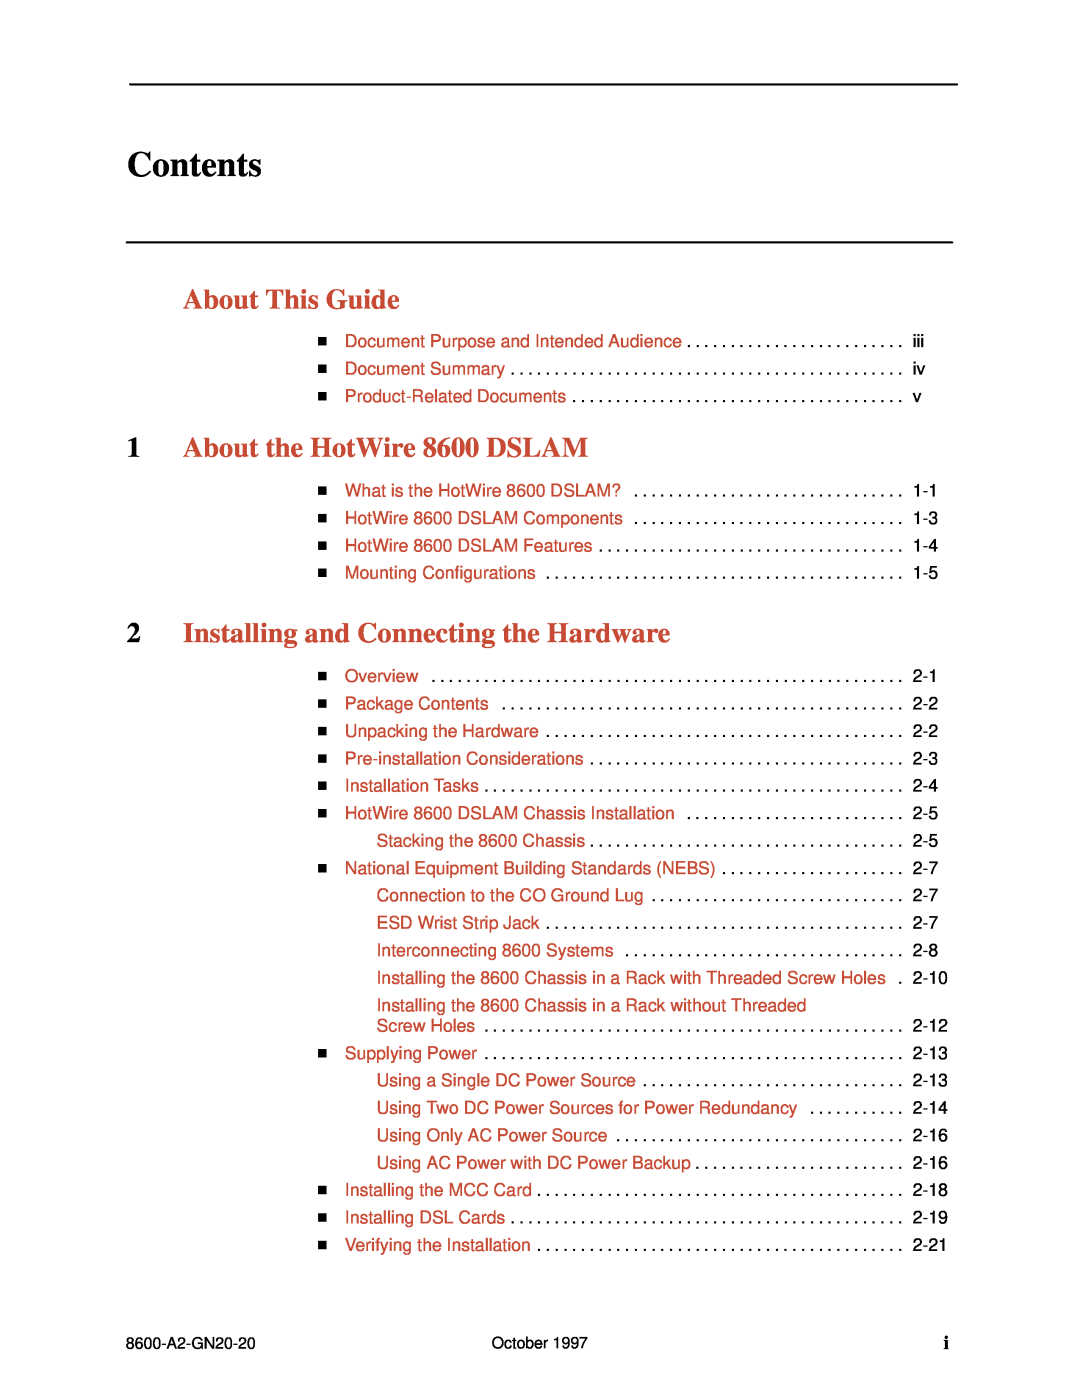 Nortel Networks manual Contents, About This Guide, About the HotWire 8600 DSLAM, Installing and Connecting the Hardware 